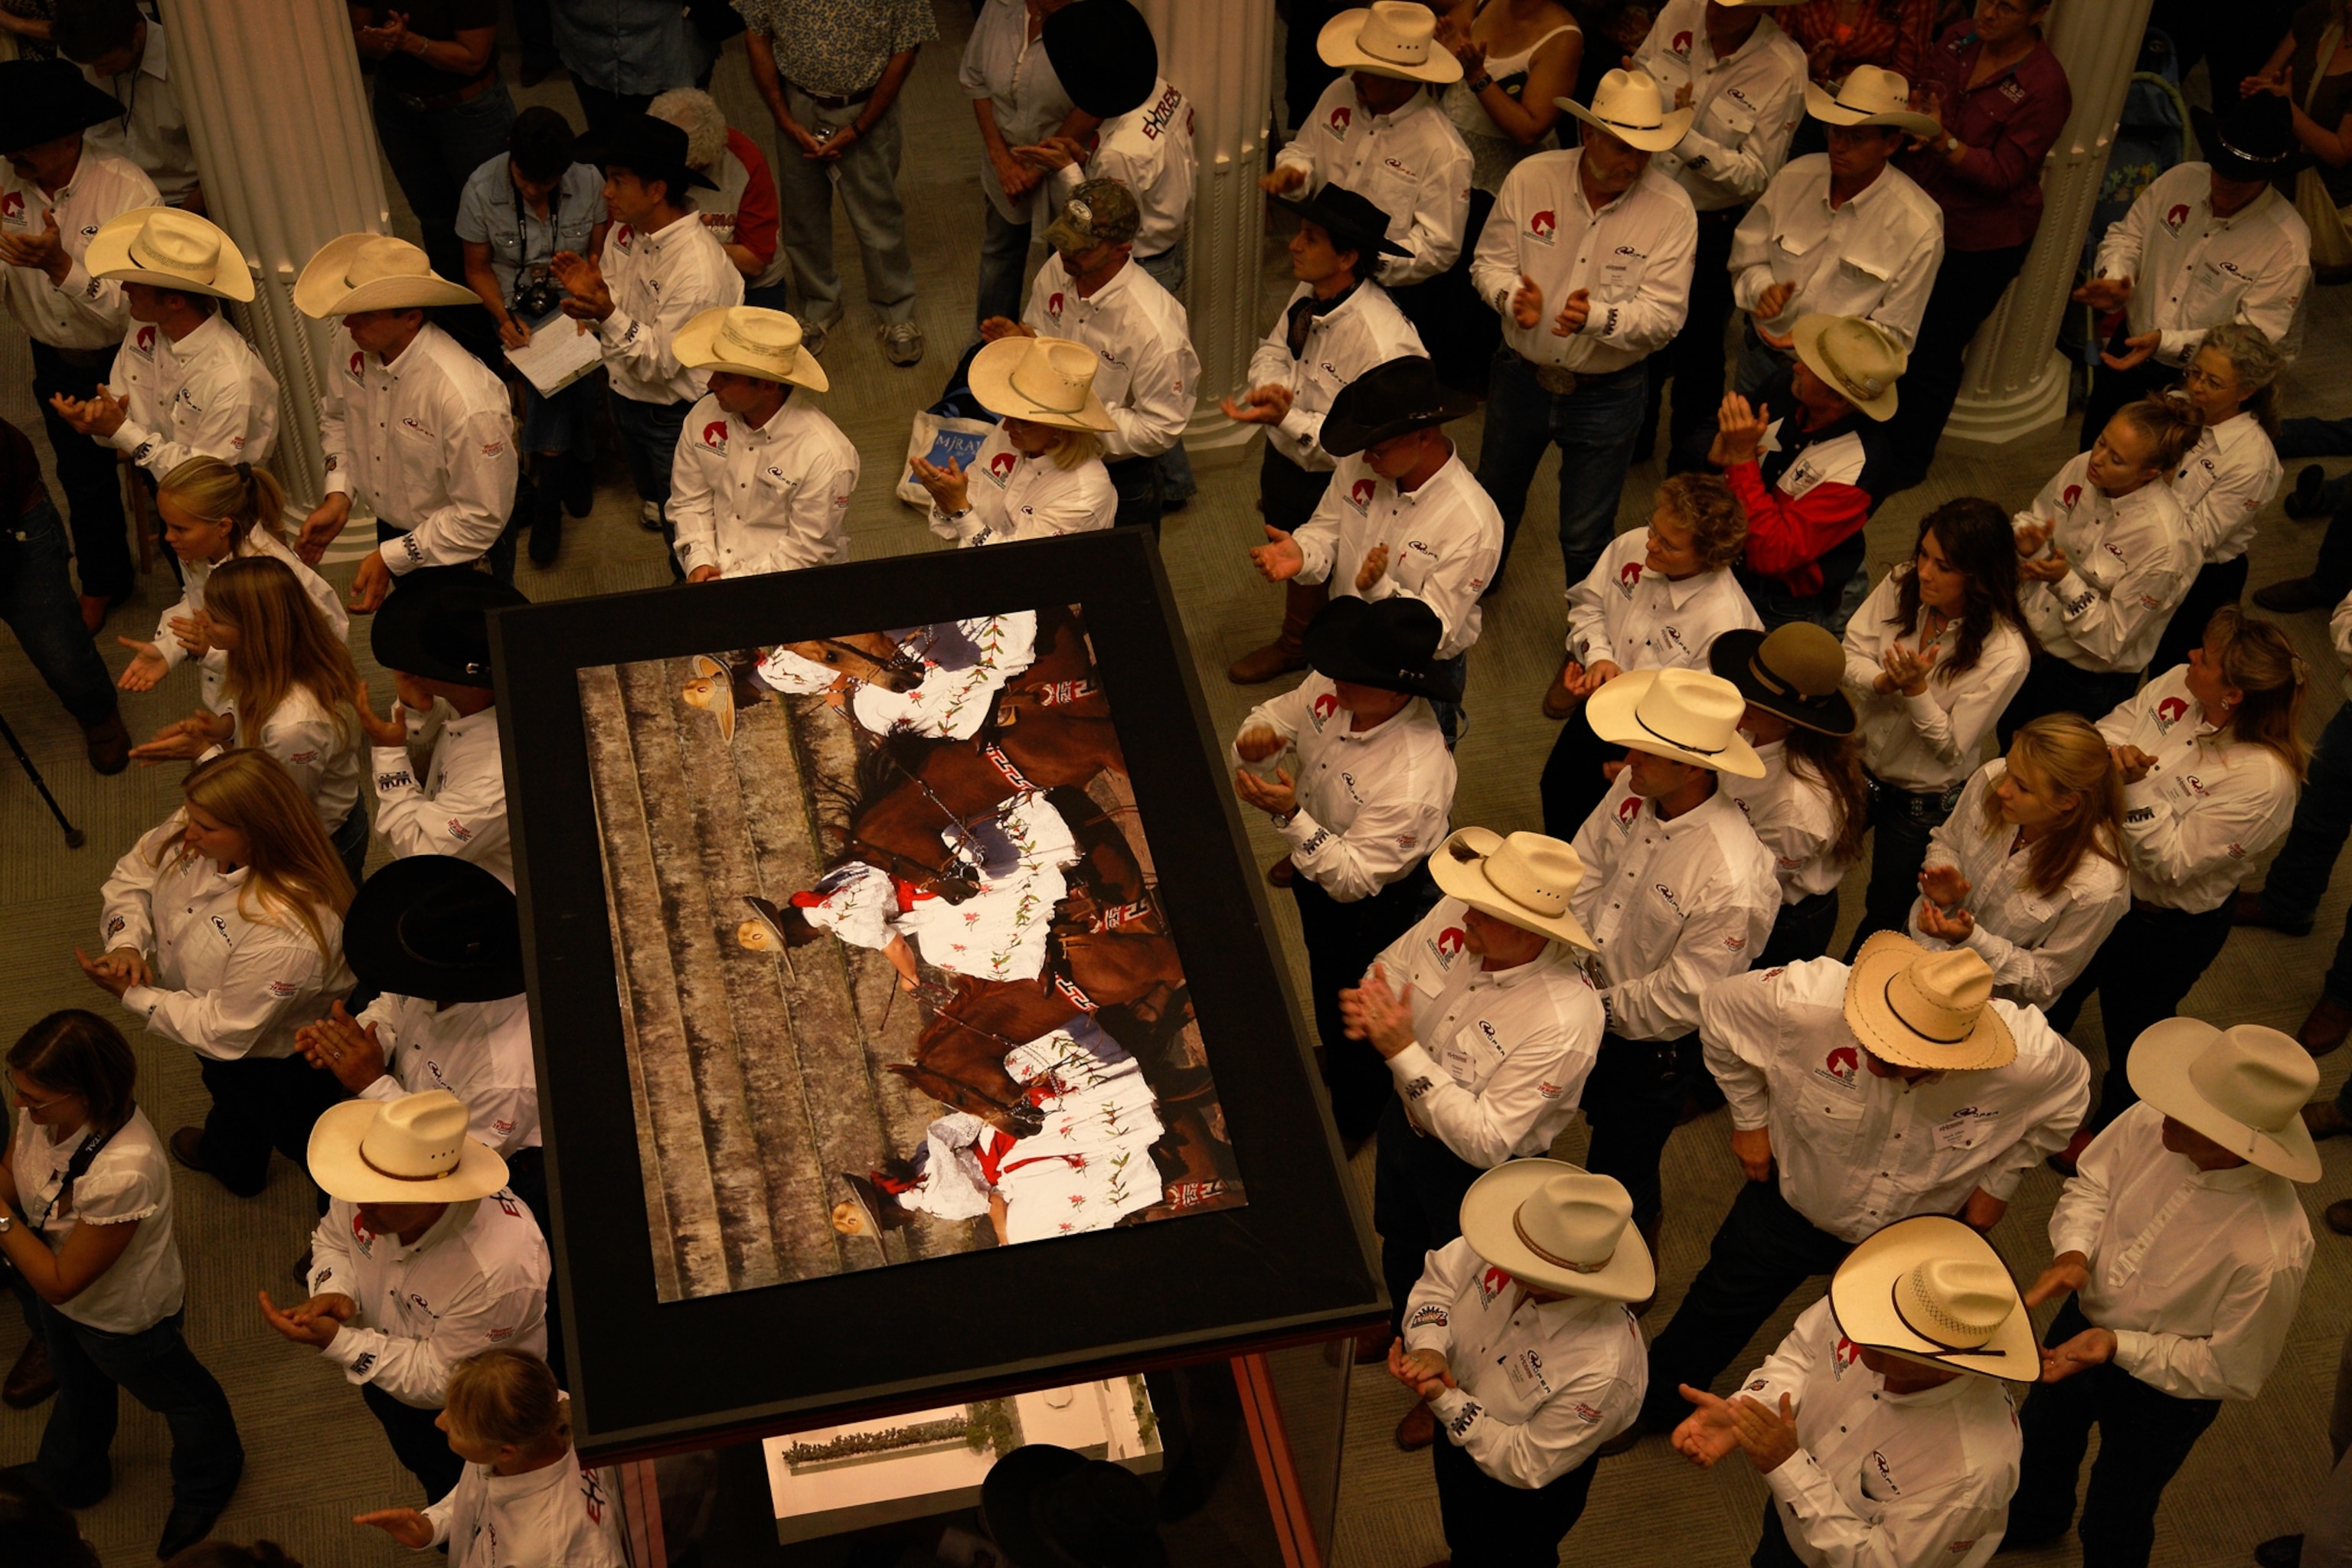 Spectators at the National Cowgirl Hall of Fame, seen from above.